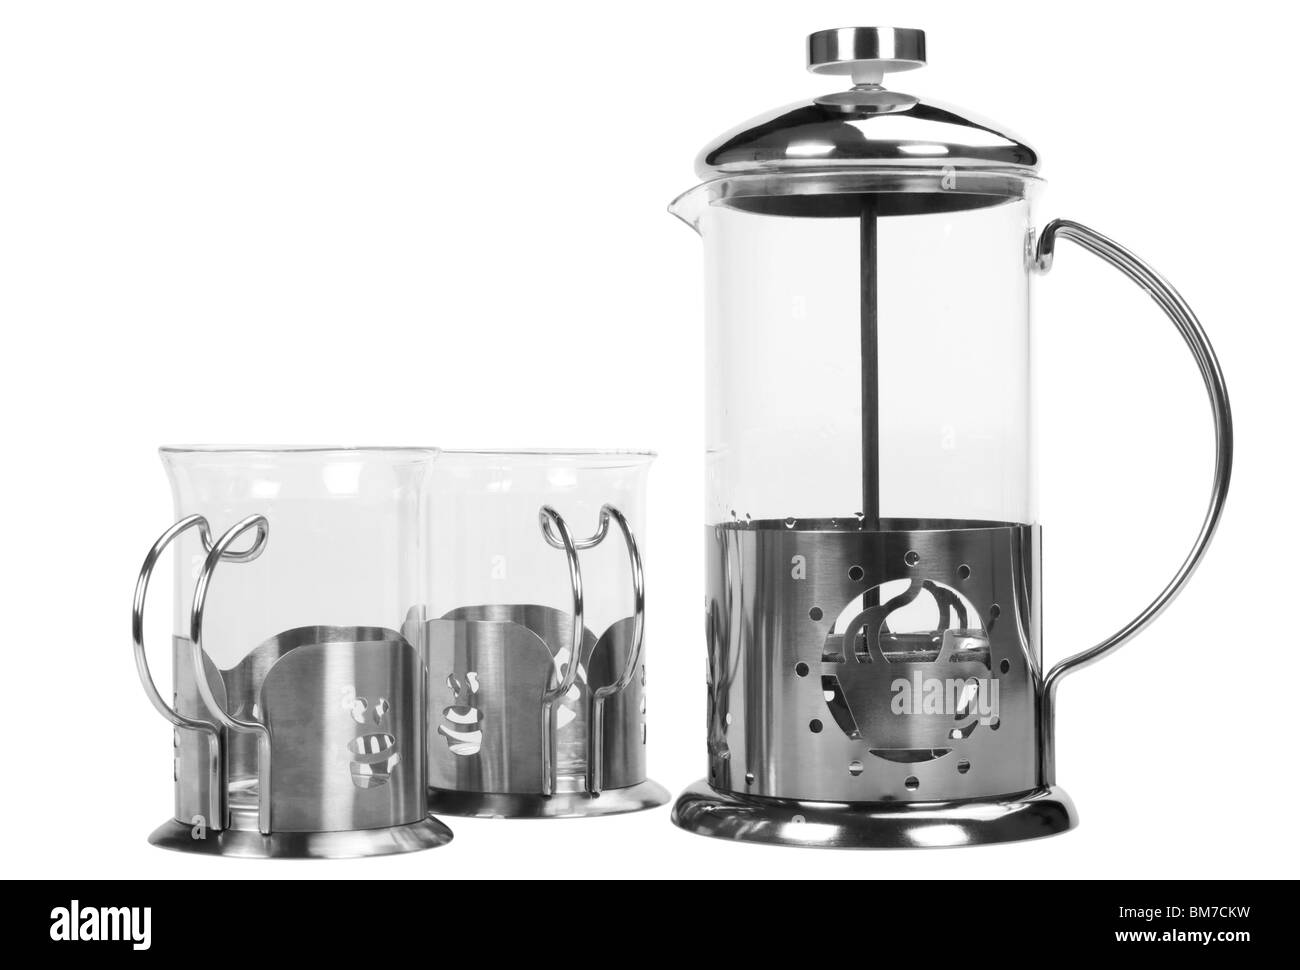 Coffee maker with coffee cups Stock Photo